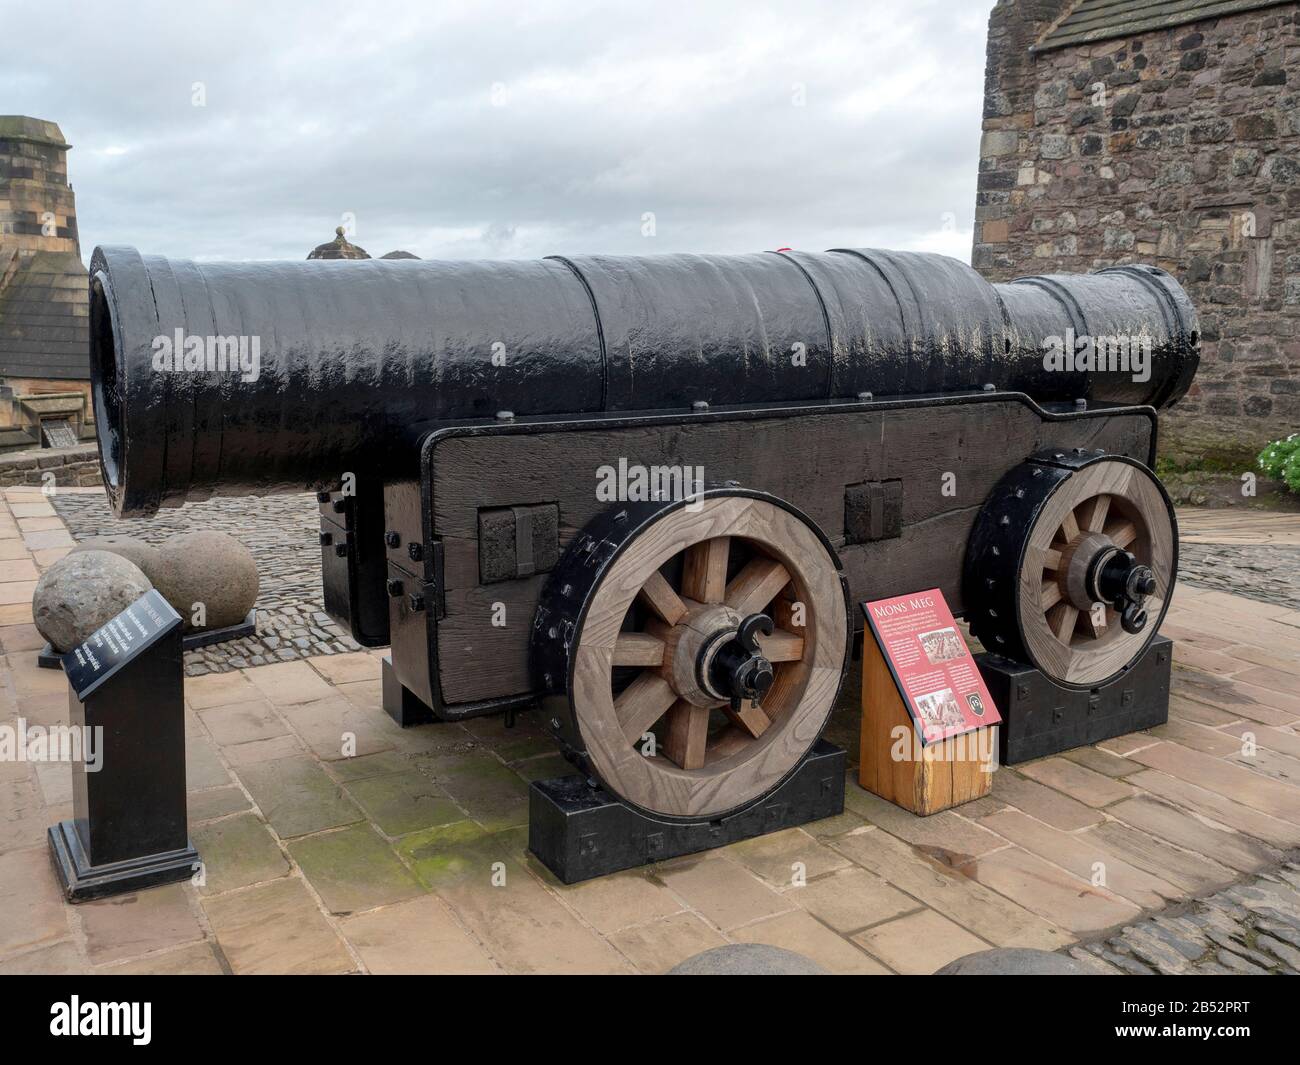 Mons Meg is a medieval bombard, a type of cannon,  located at Edinburgh Castle in Scotland. Stock Photo